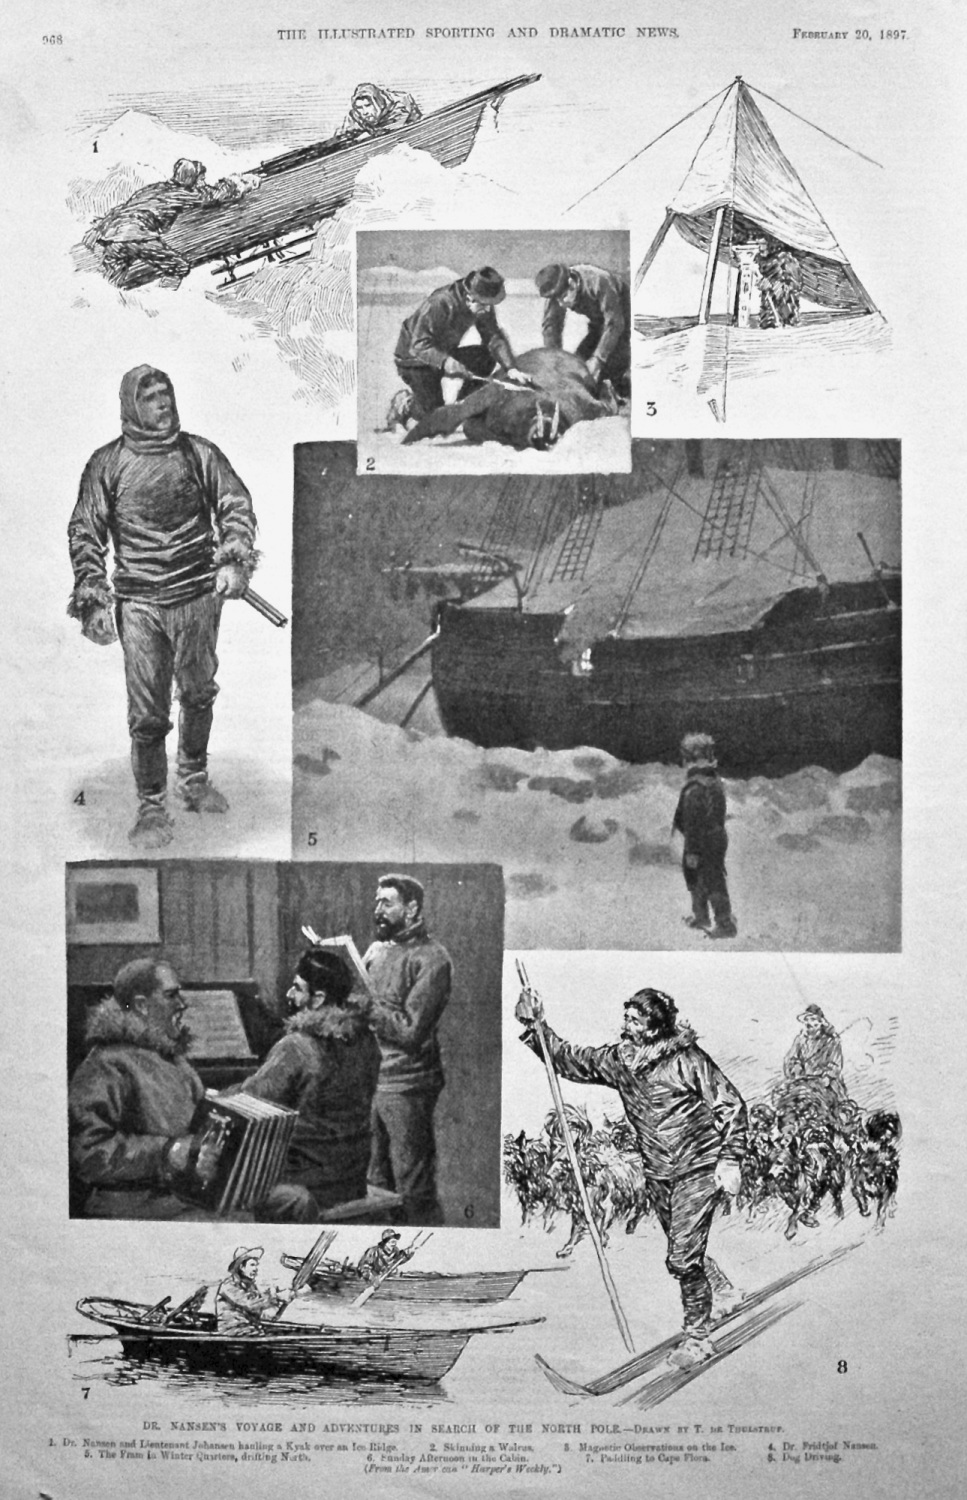 Dr. Nansen's Voyage and Adventures in Search of the North Pole. 1897.